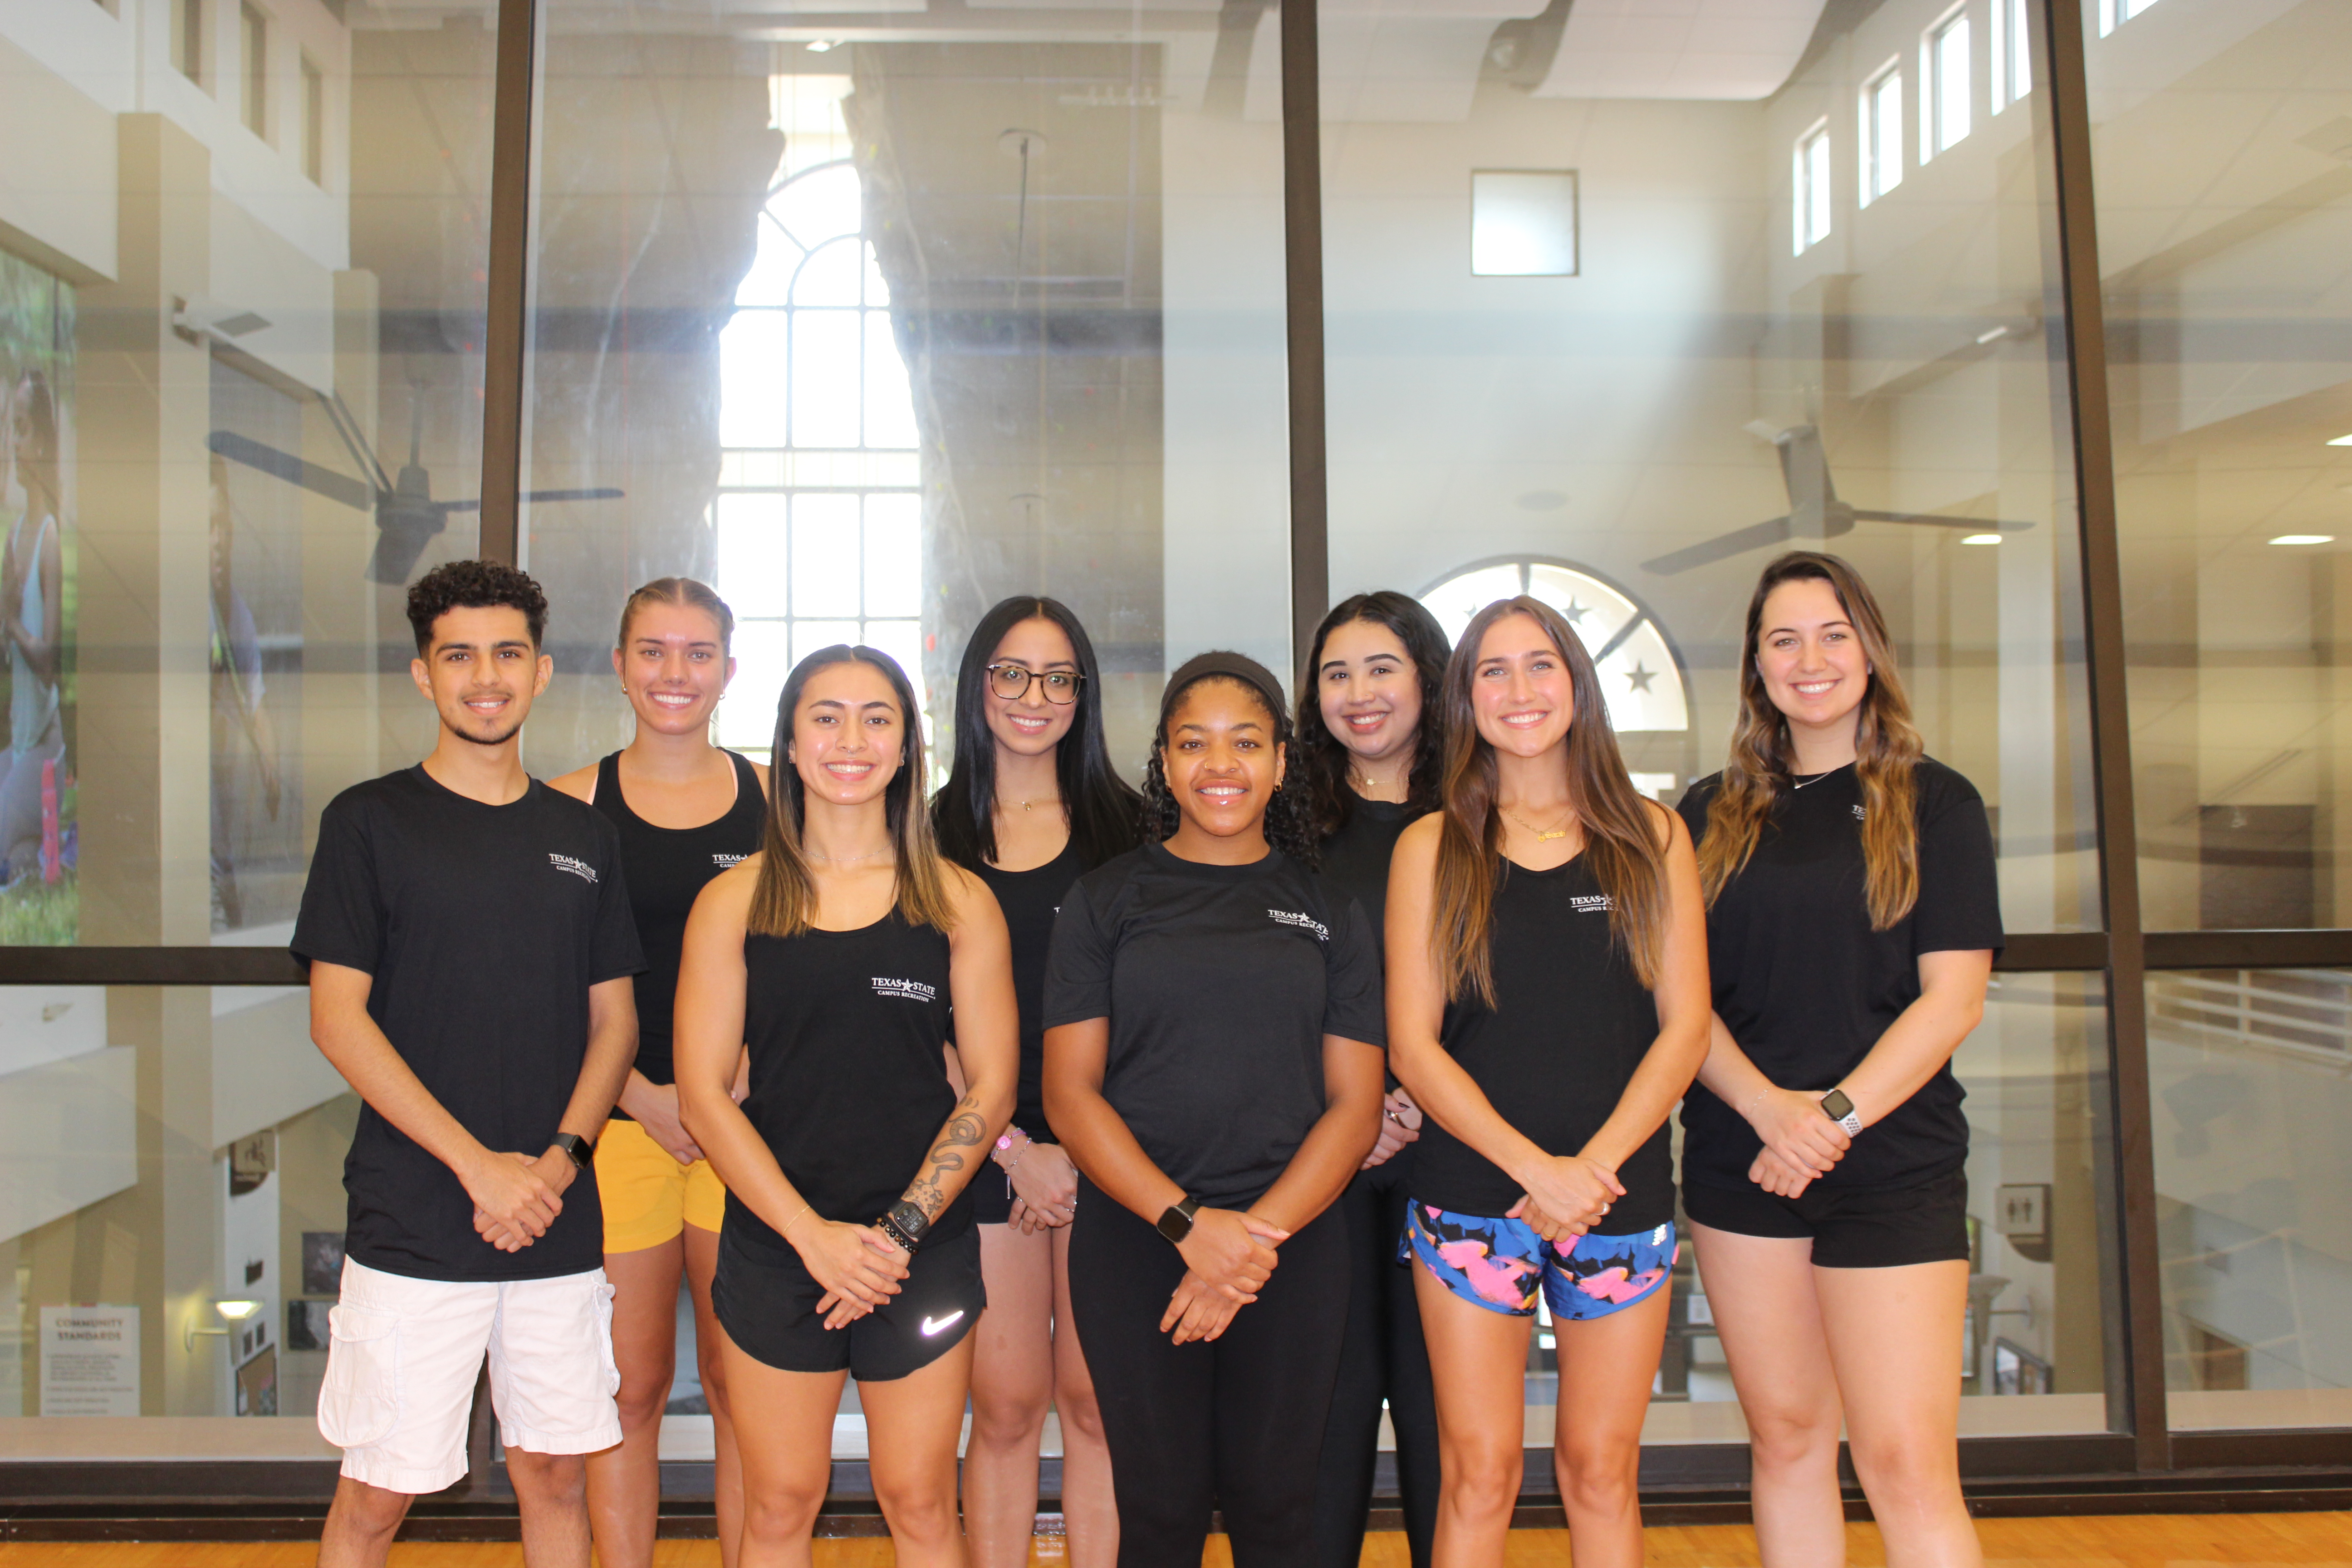 The Group Fitness Instructors